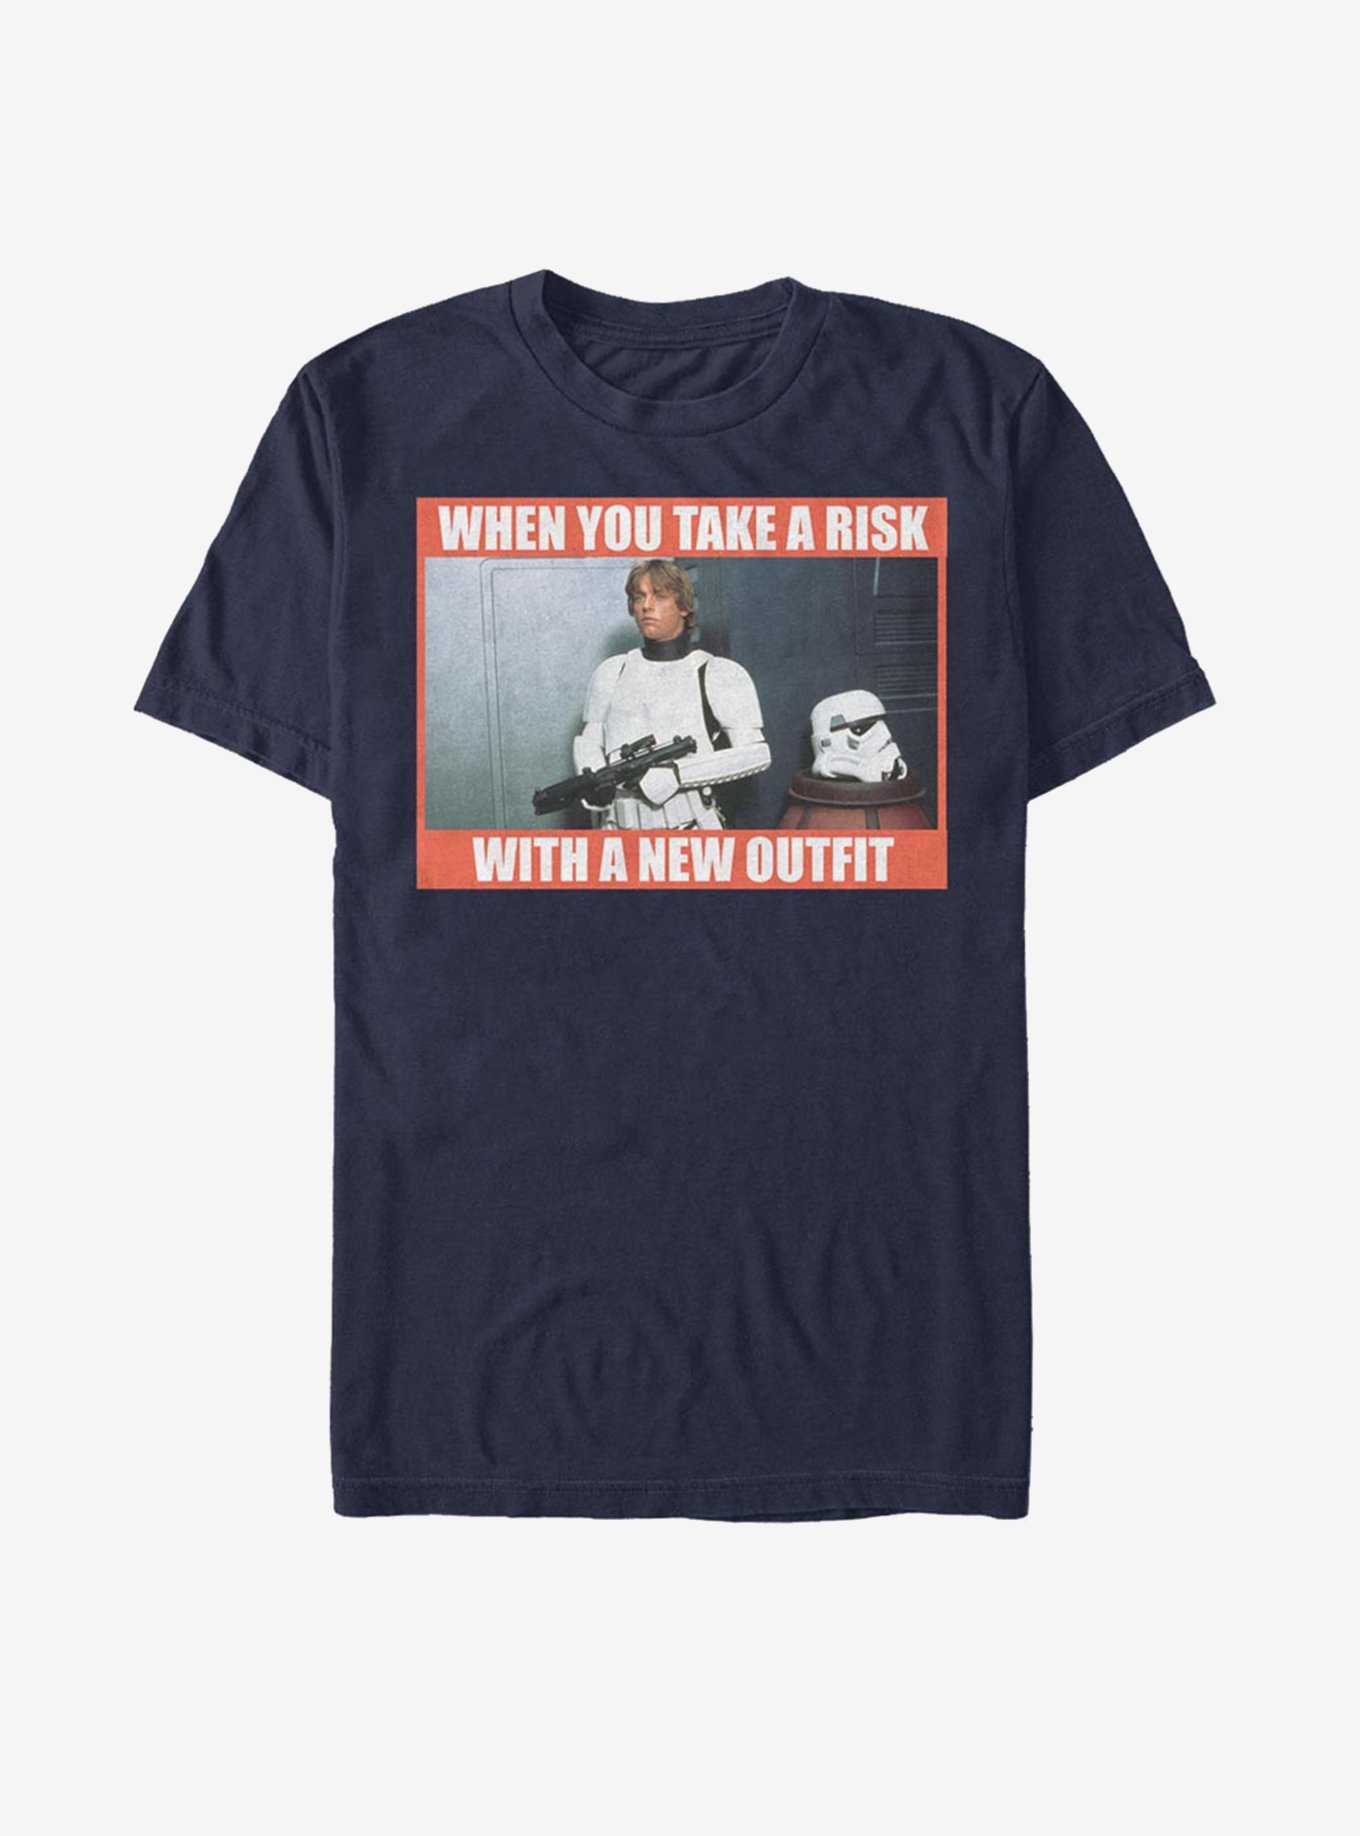 Star Wars Risky New Outfit T-Shirt, , hi-res